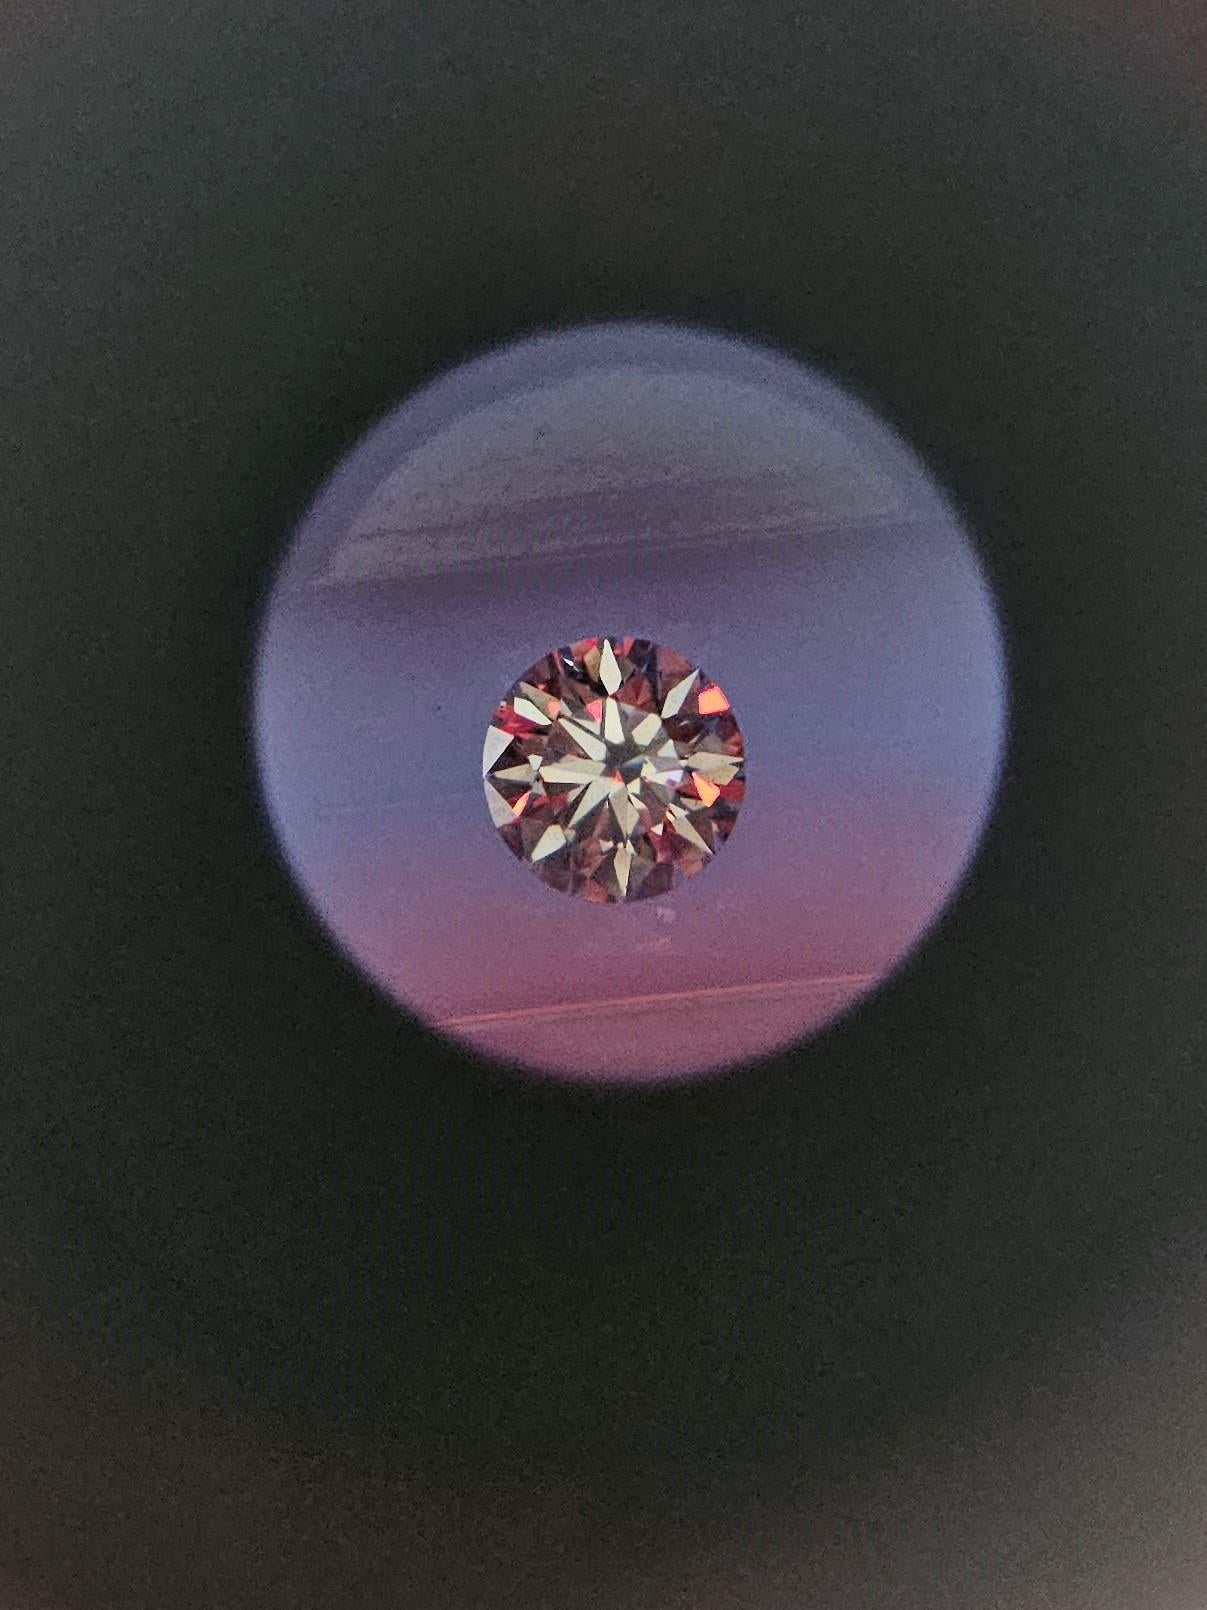  NEW Cert 6.77CT Unheated Natural Vivid Hot Pink Spinel Diamond Ring in Platinum For Sale 4